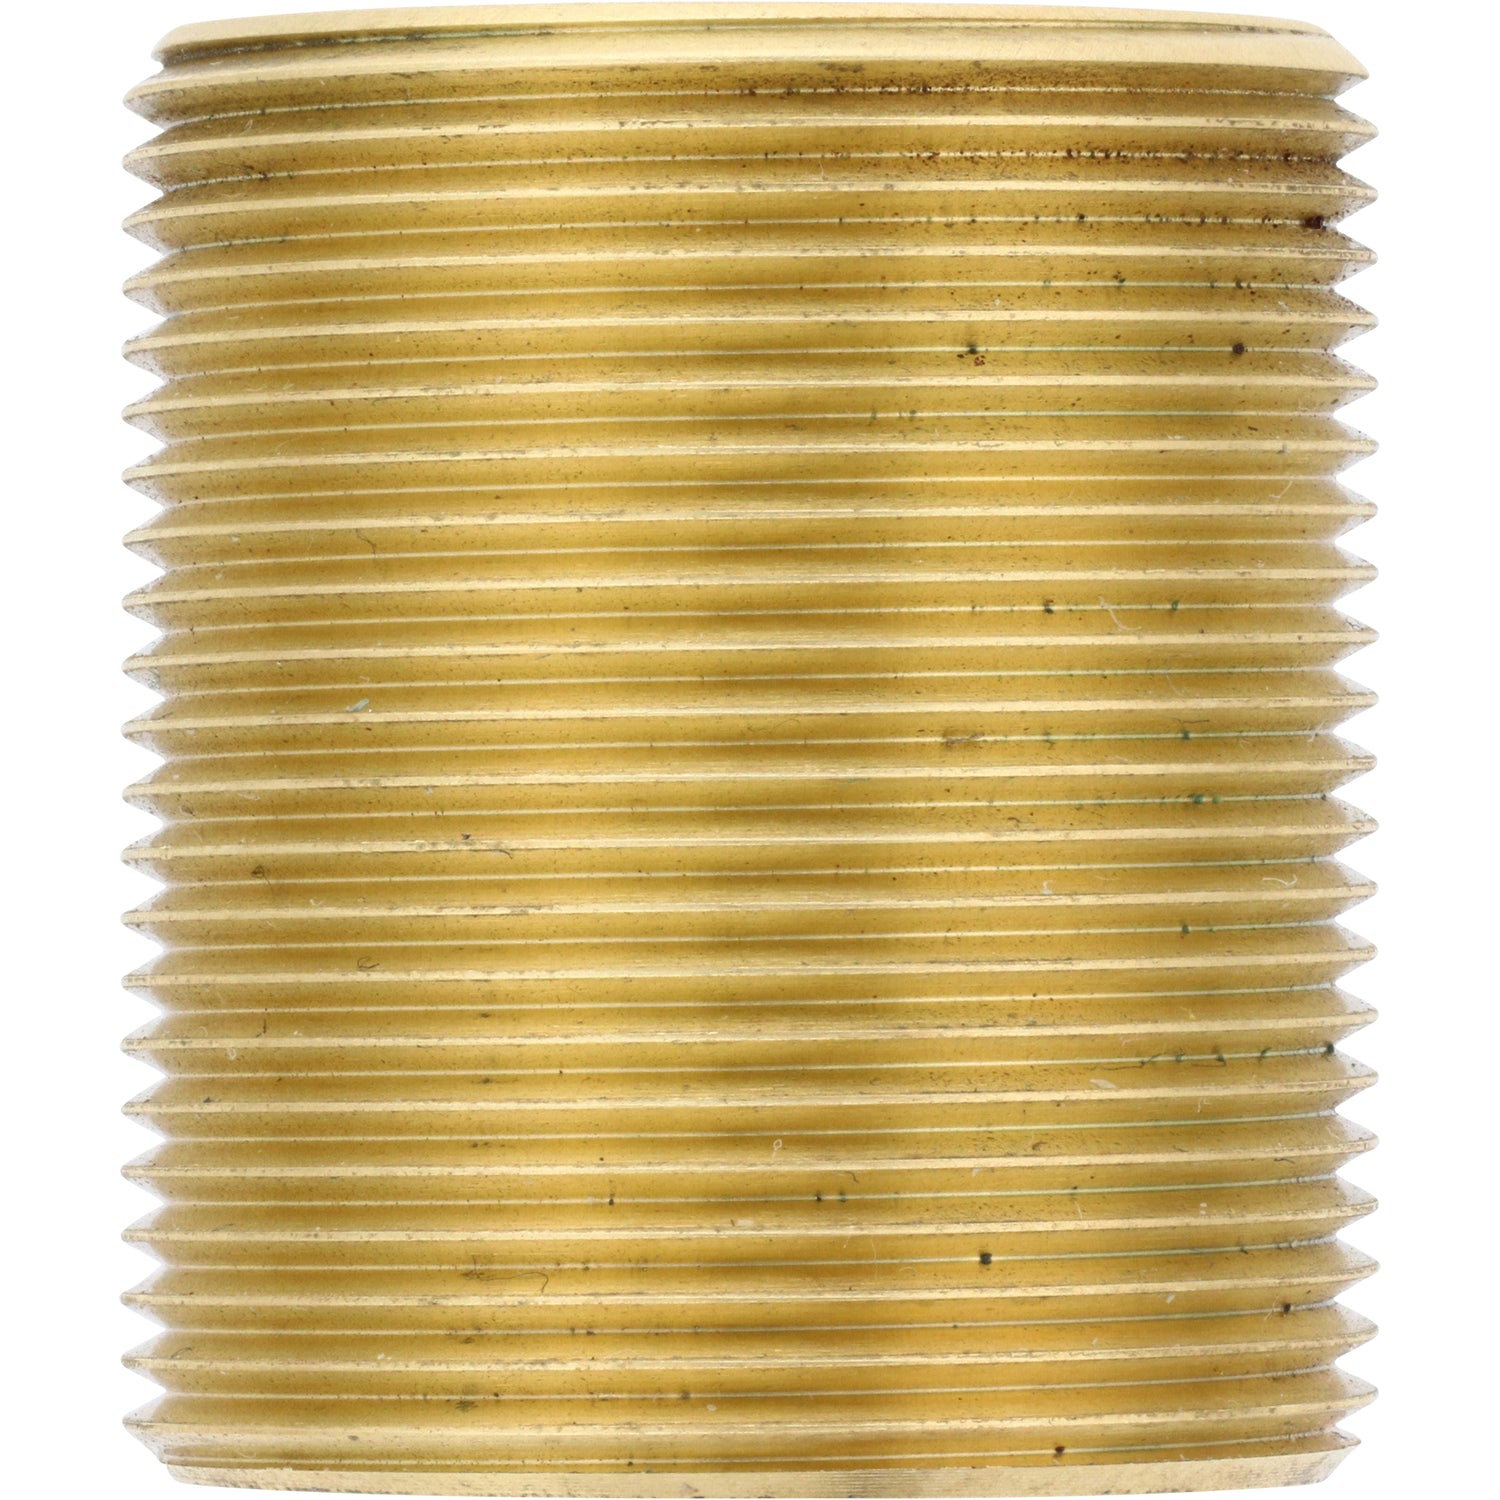 Machined brass with cylindrical shape and full threads. Shown on white background. FC6B